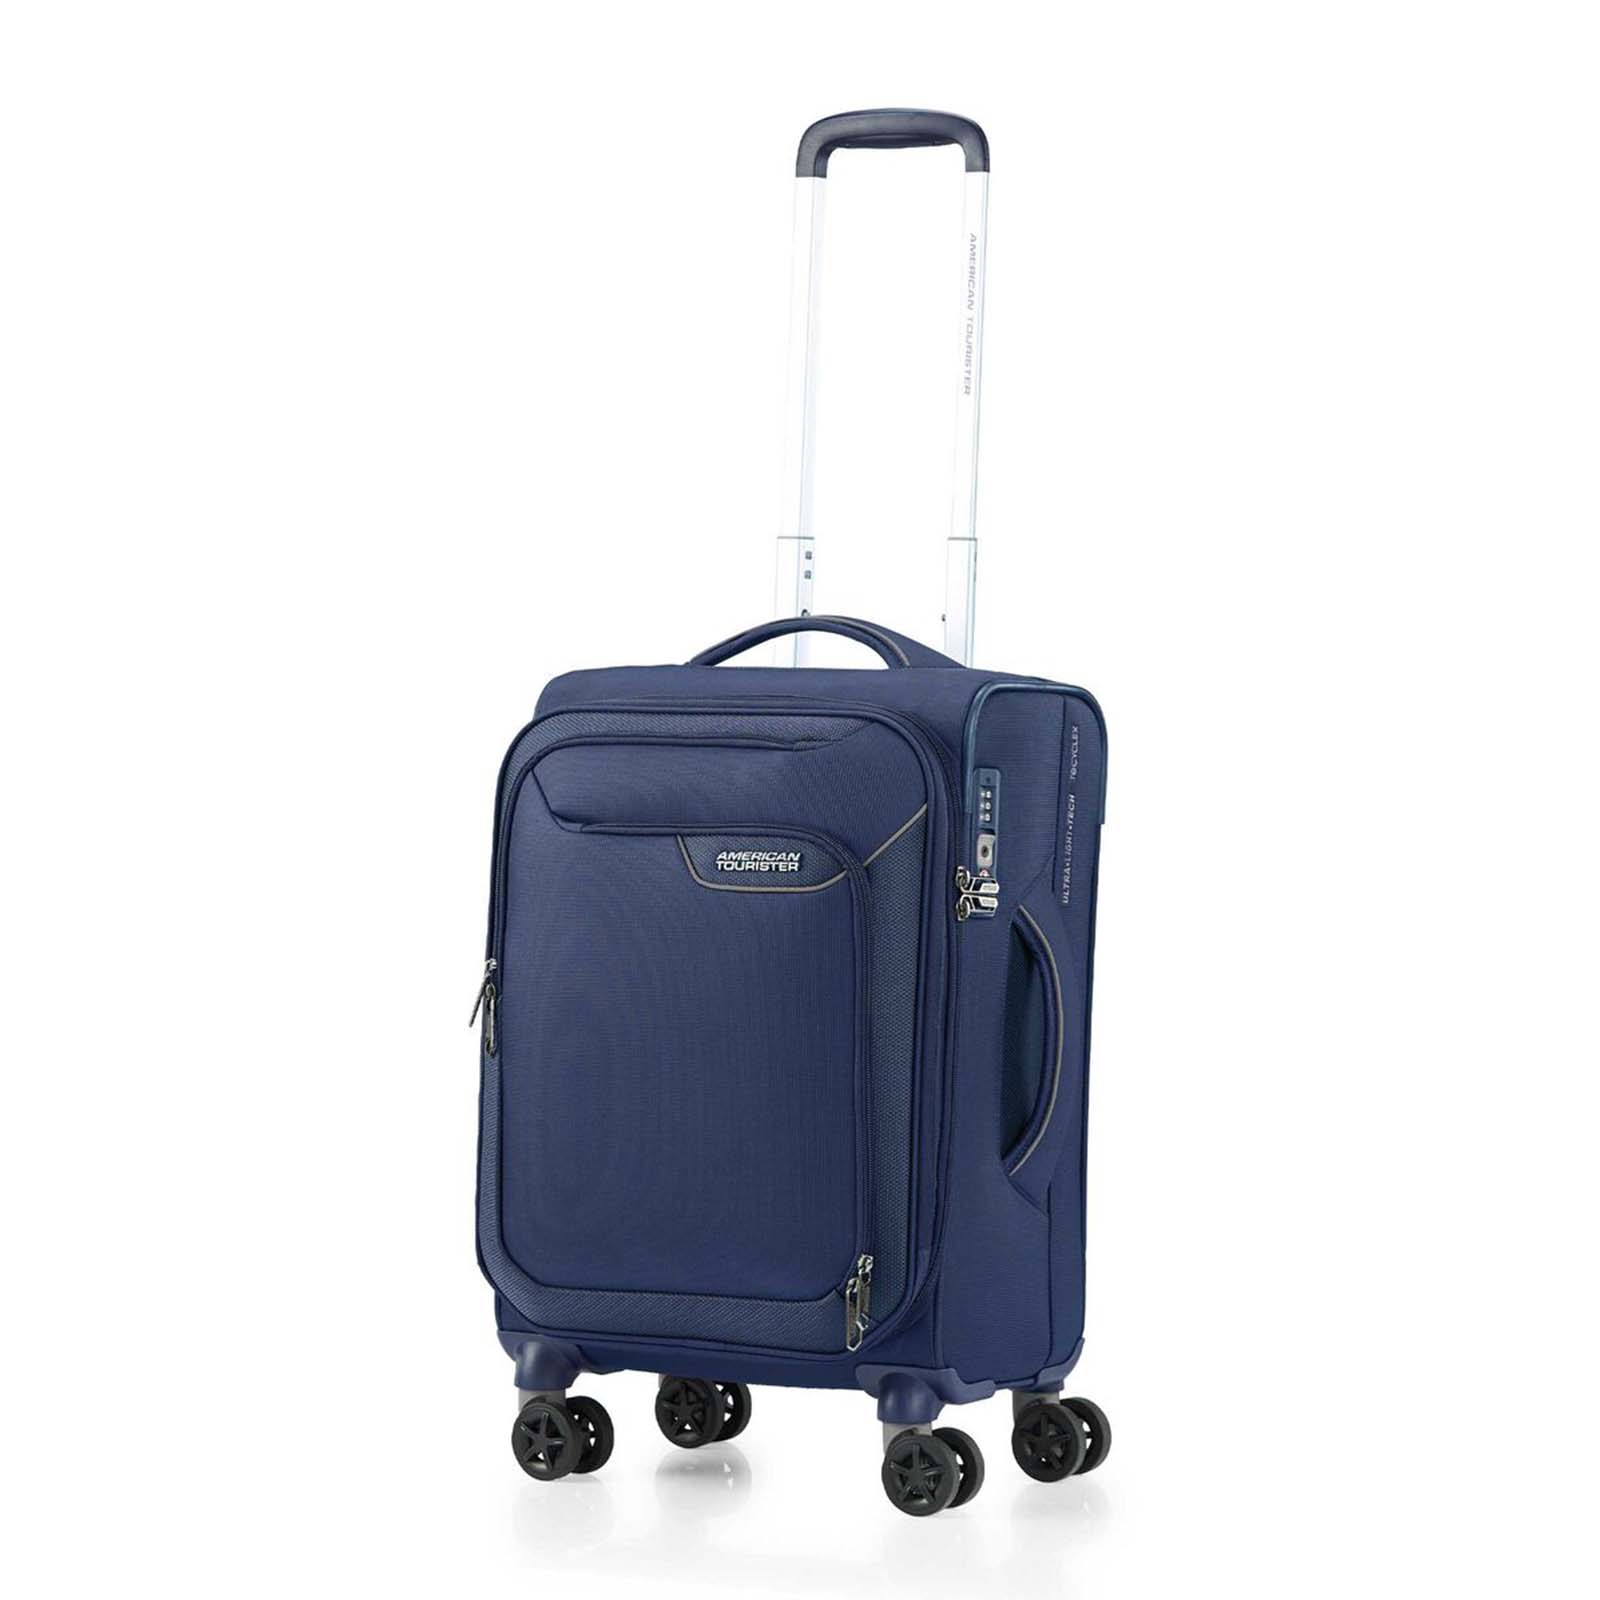 American-Tourister-Applite-4-Eco-55cm-Carry-On-Suitcase-Navy-Front-Angle